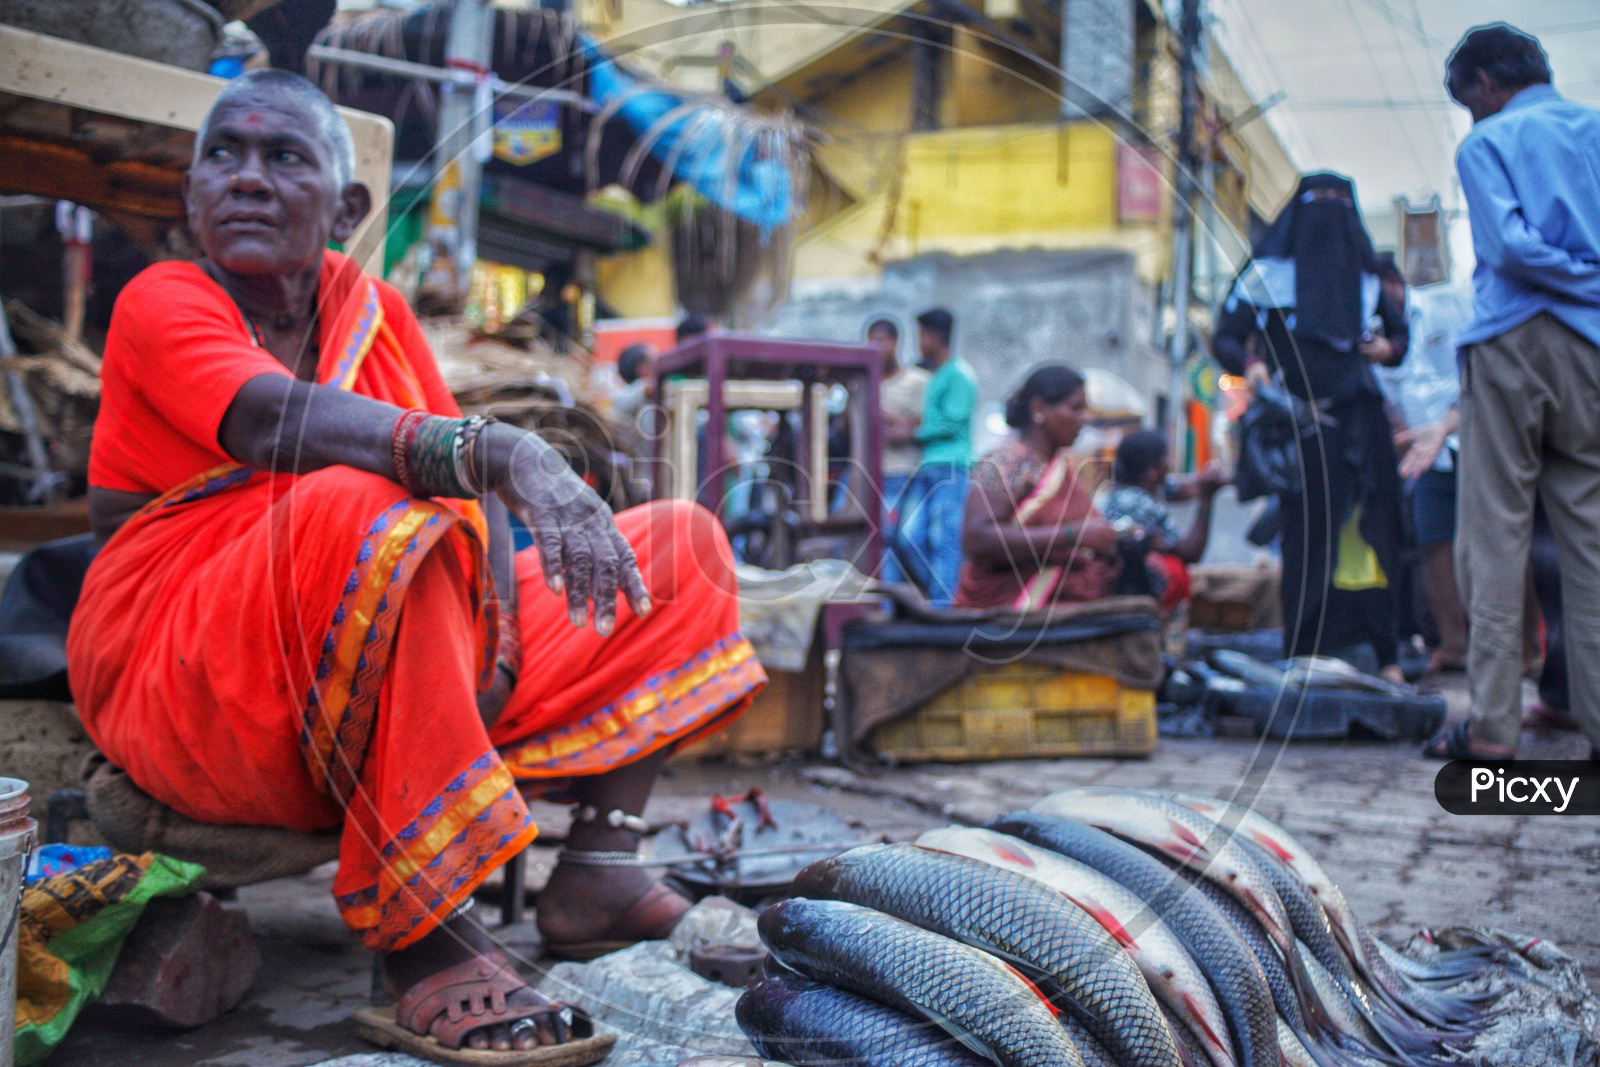 A Woman Vendor Selling Fish In a Market